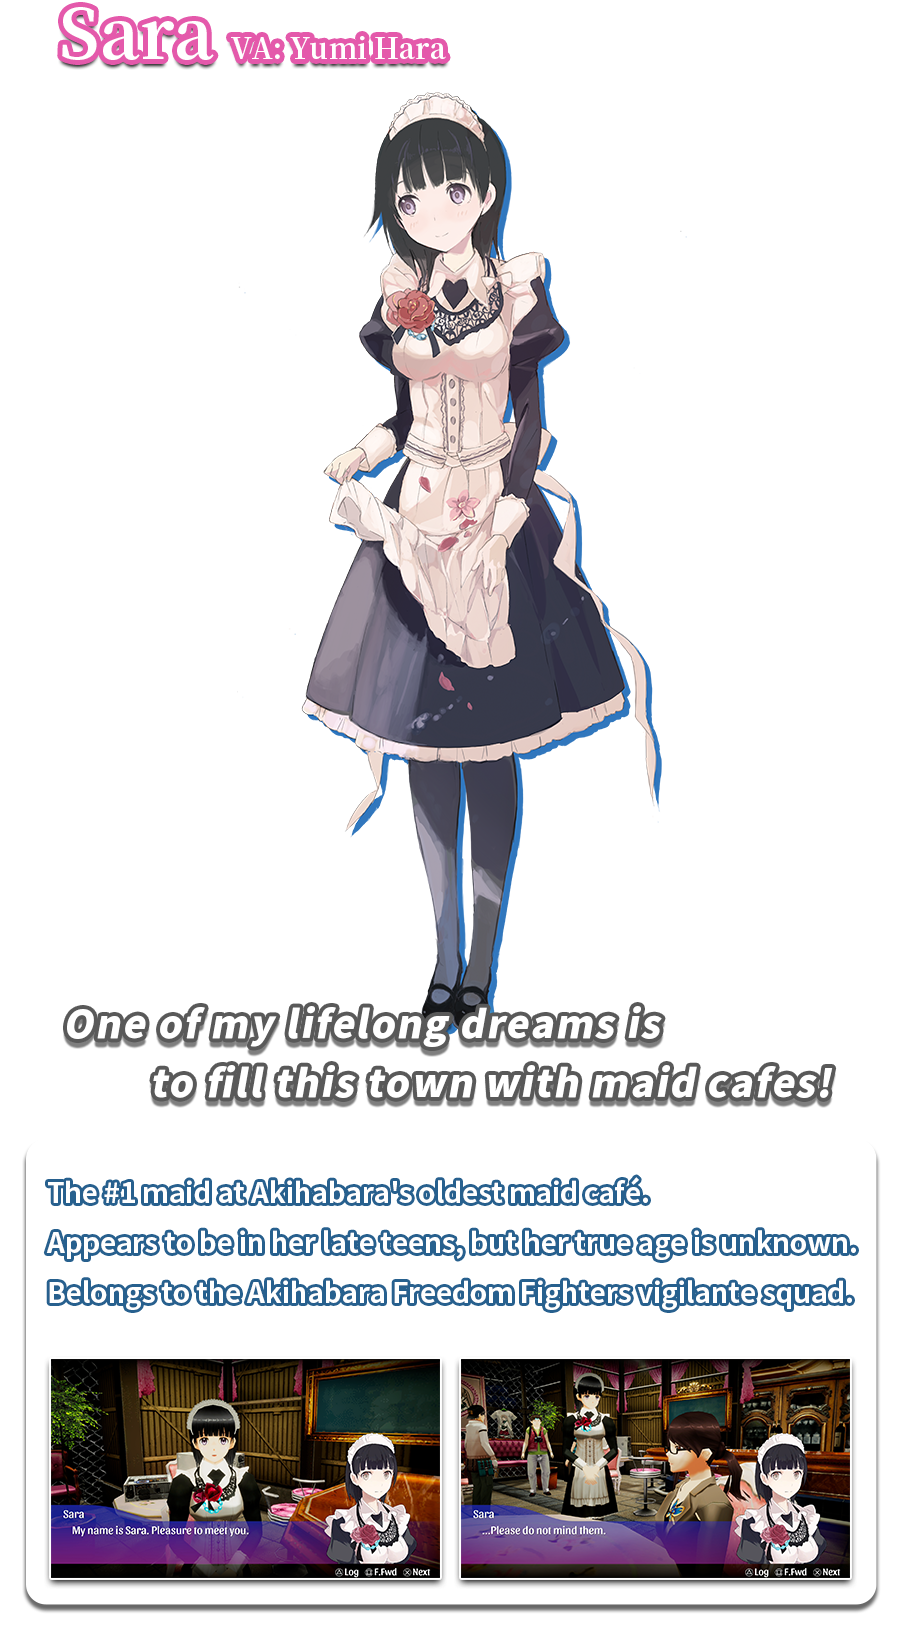 The #1 maid at Akihabara's oldest maid café. Appears to be in her late teens, but her true age is unknown. Belongs to the Akihabara Freedom Fighters vigilante squad.